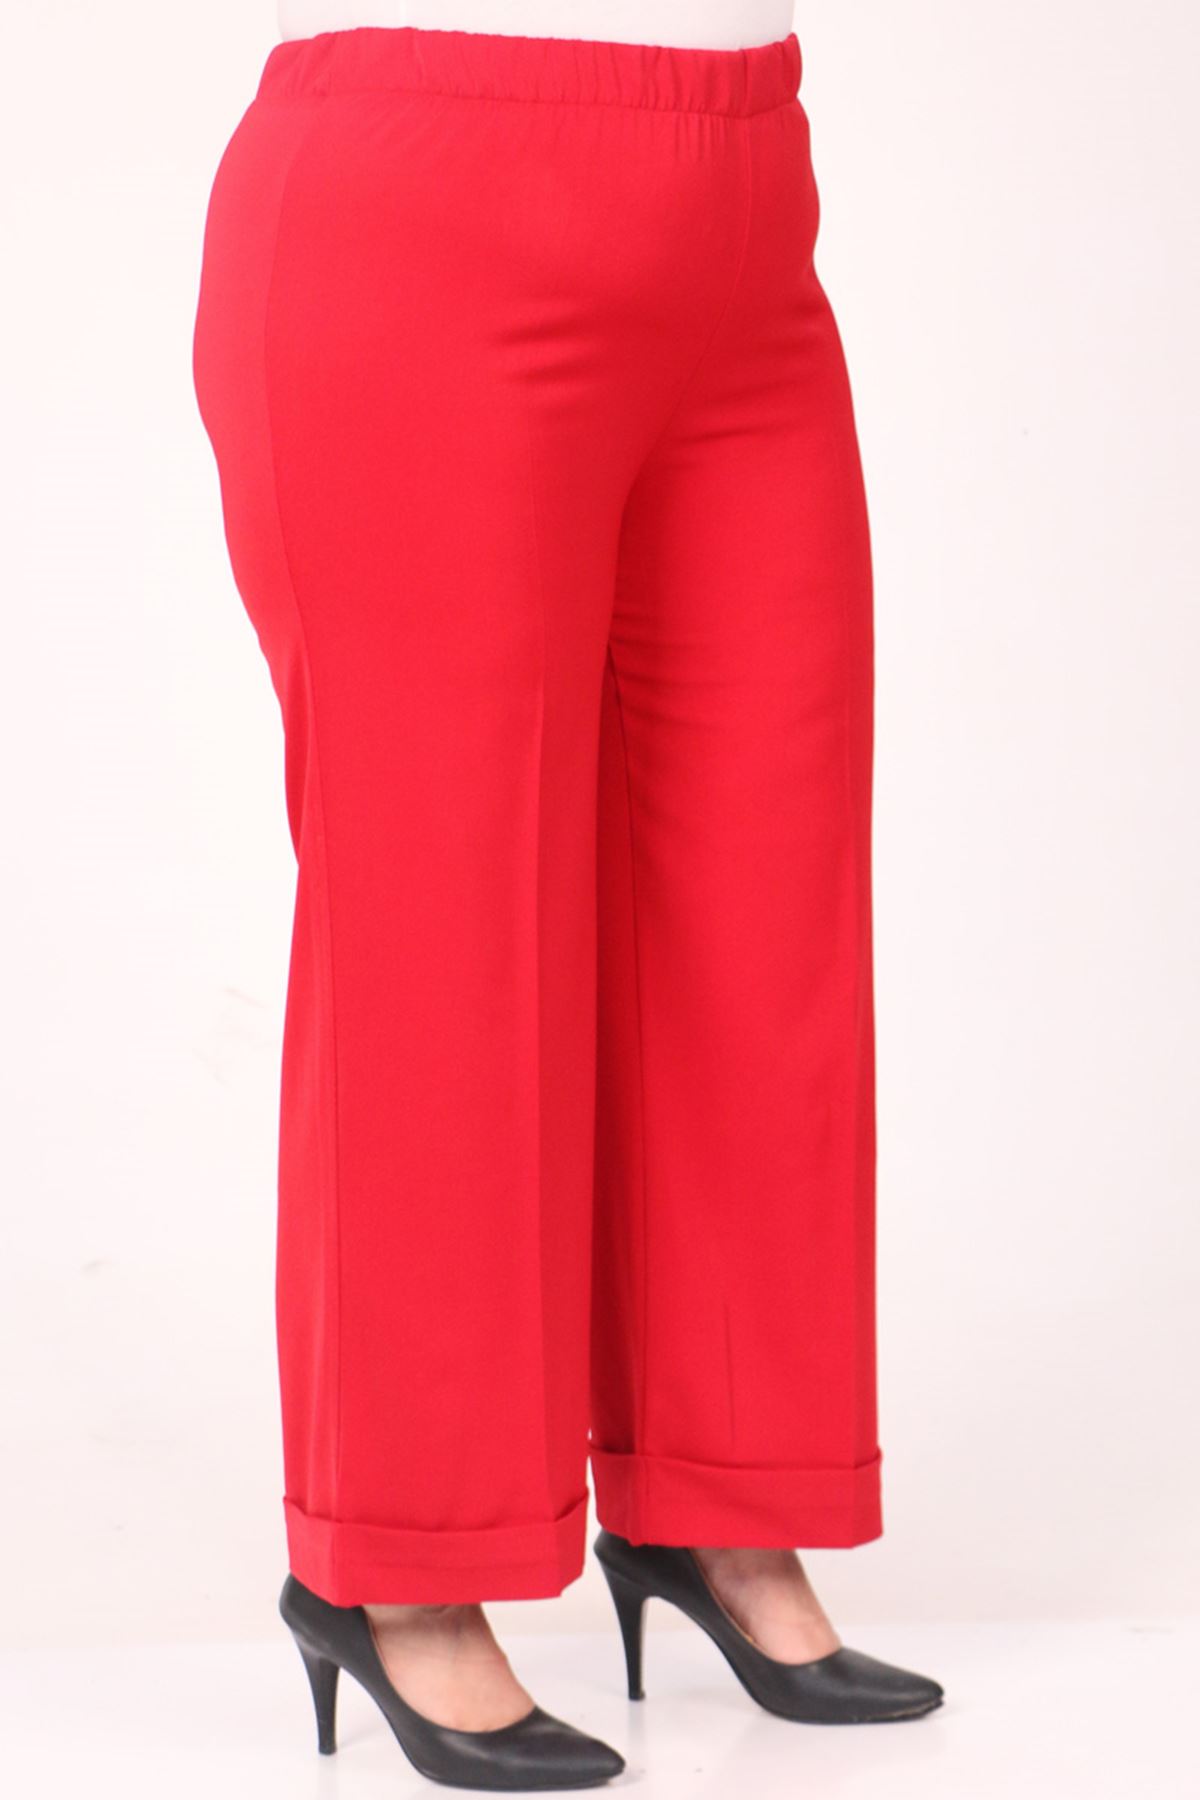 39022 Large Size Elastic Waist Double Leg Trousers - Red